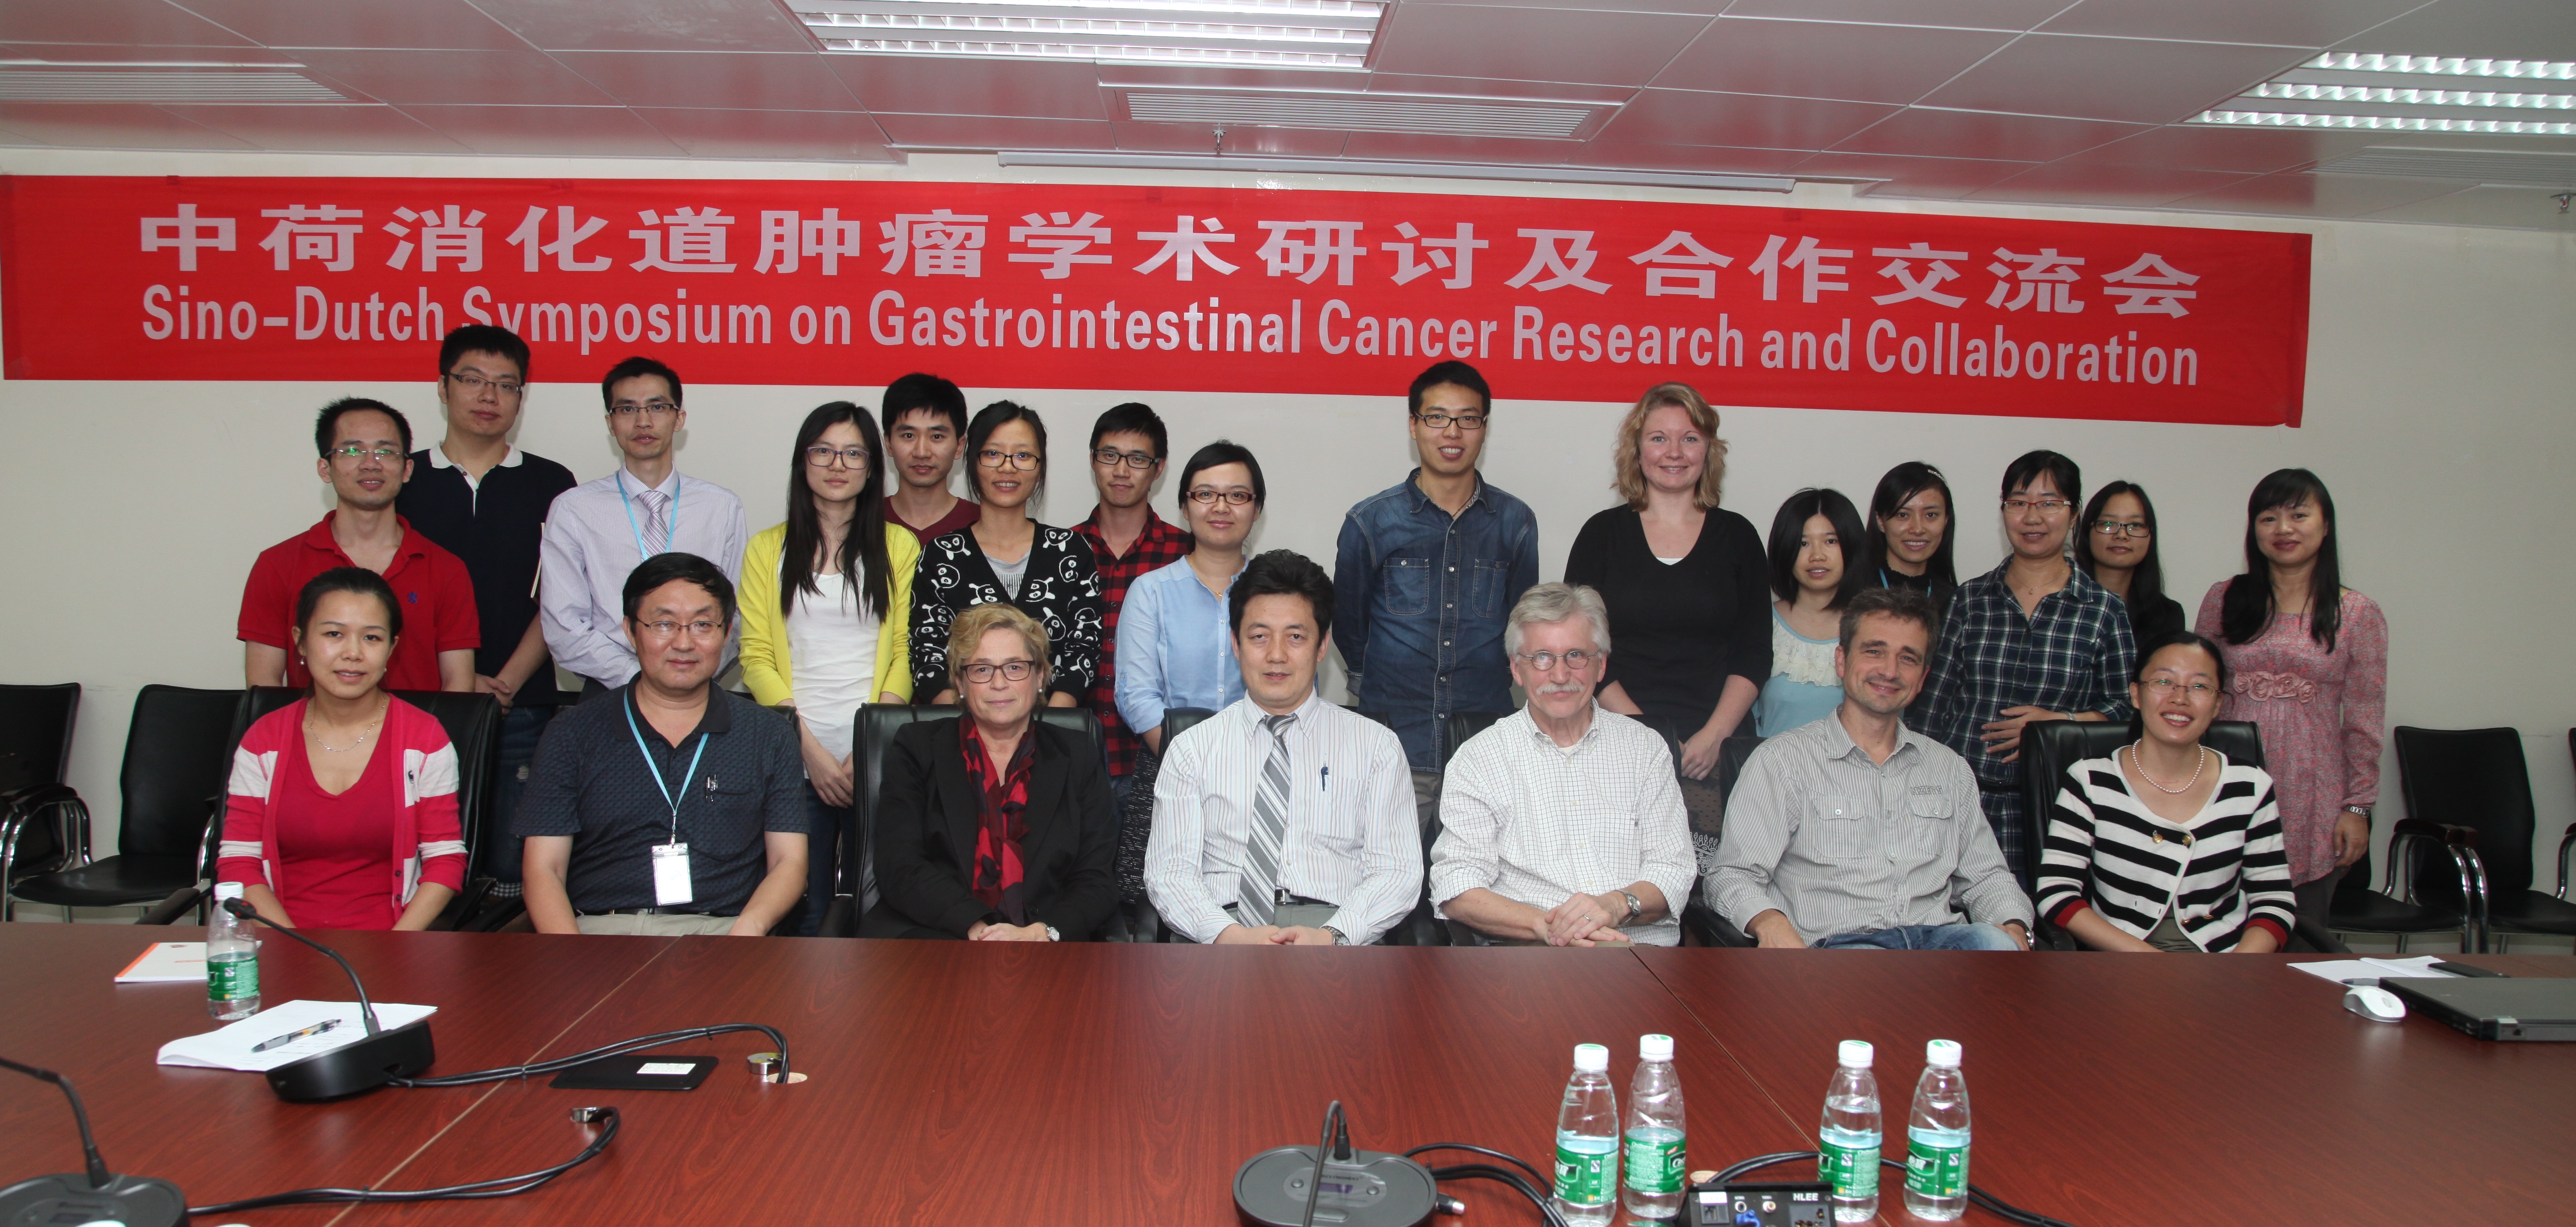 Sino-Dutch Symposium on Gastrointestinal Cancer Research and Collaboration